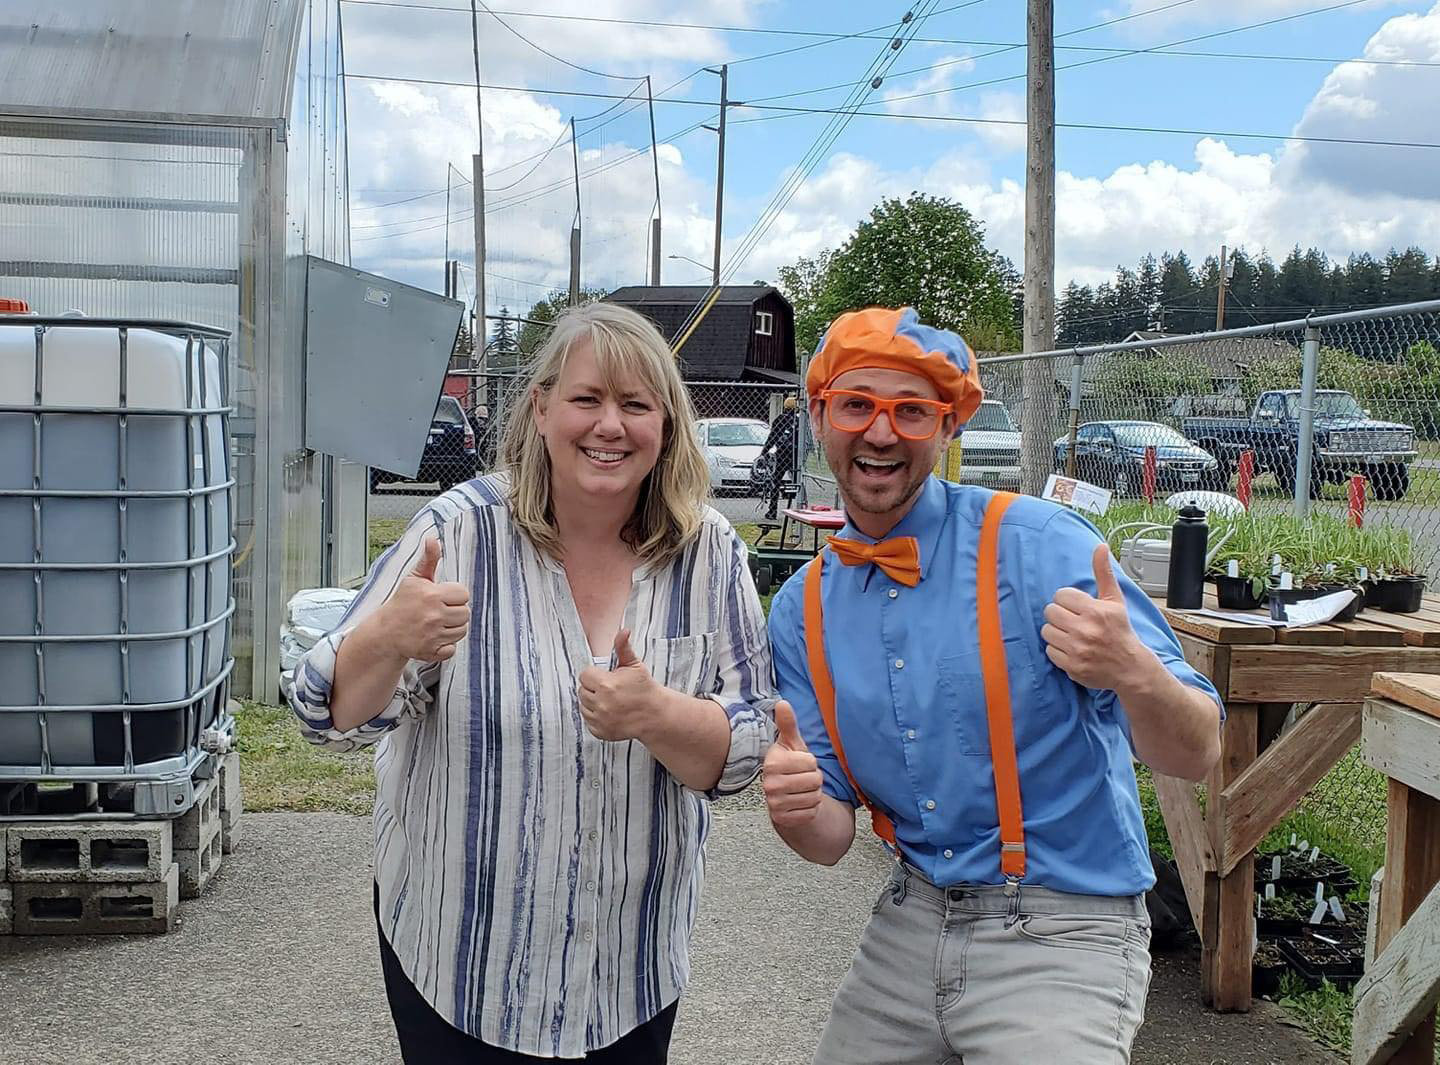 Tenino High Sschool teacher and FFA adviser Geraldine “Pete” Maxfield poses with Blippi during his visit to the city last week.